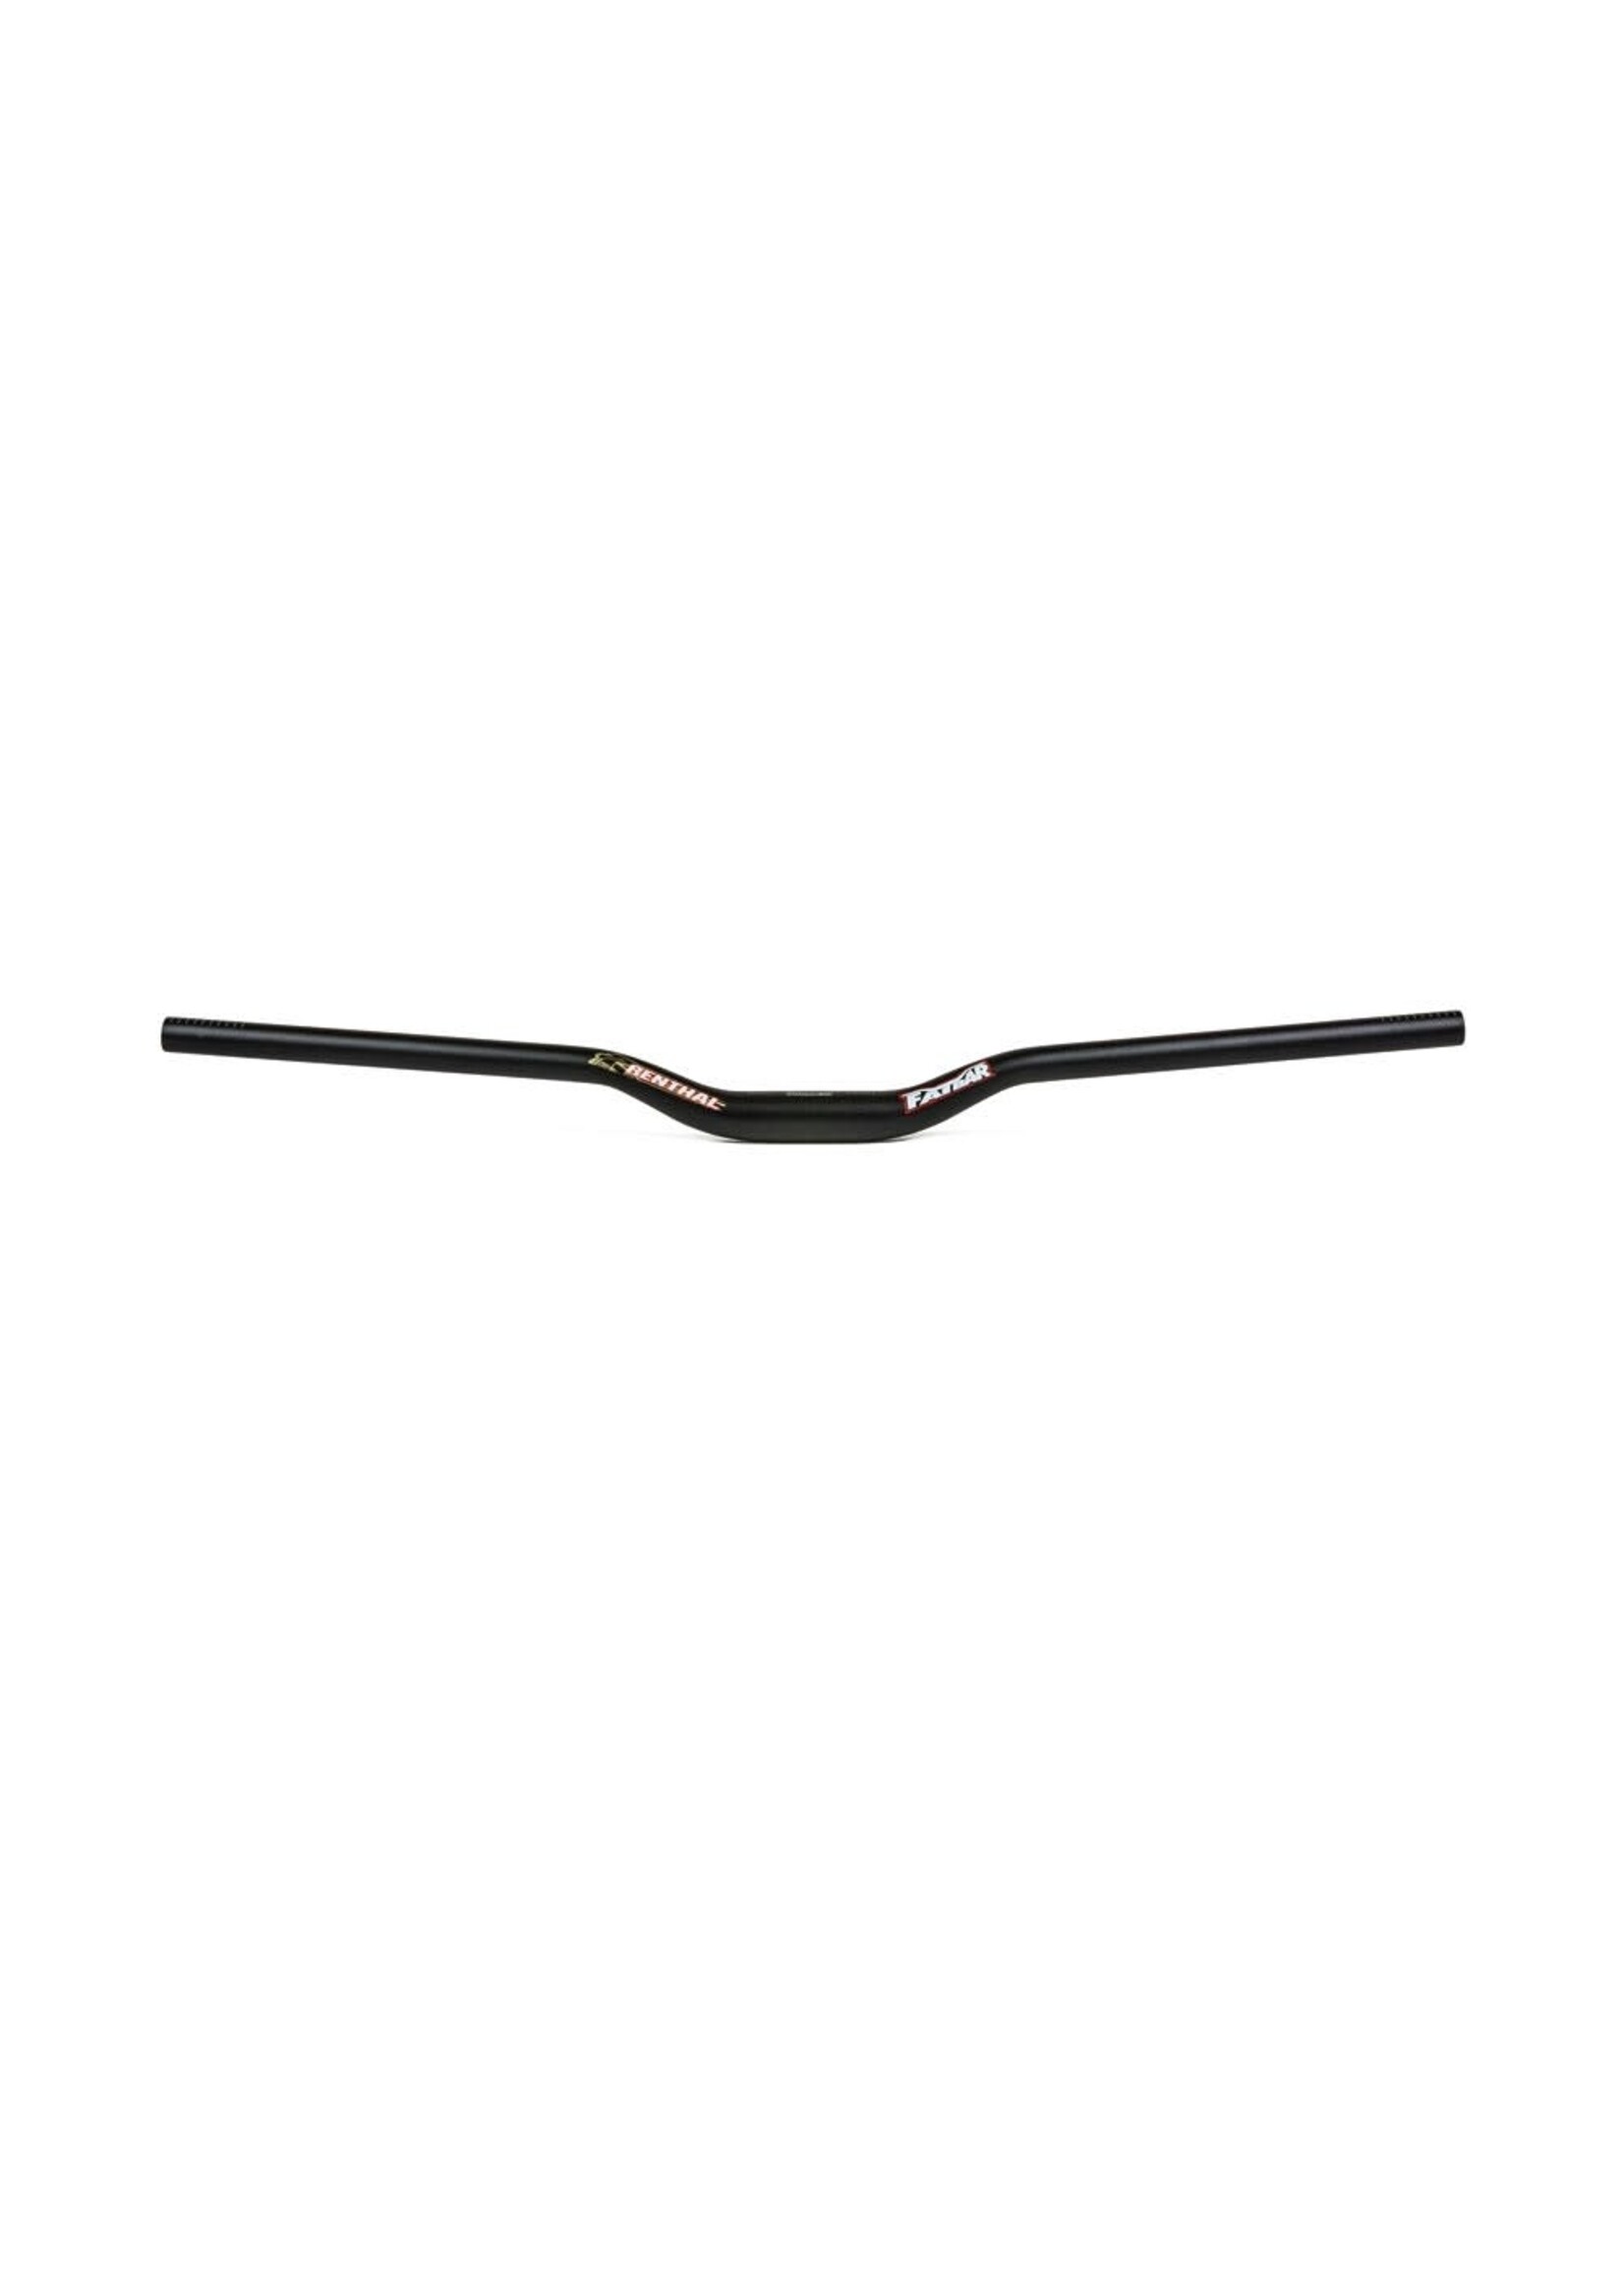 Renthal Renthal FatBar V2 31.8mm Black, 7050 T6 Alloy, 30mm Rise, 7 Degree, 31.8 Clamp, 800mm Wide